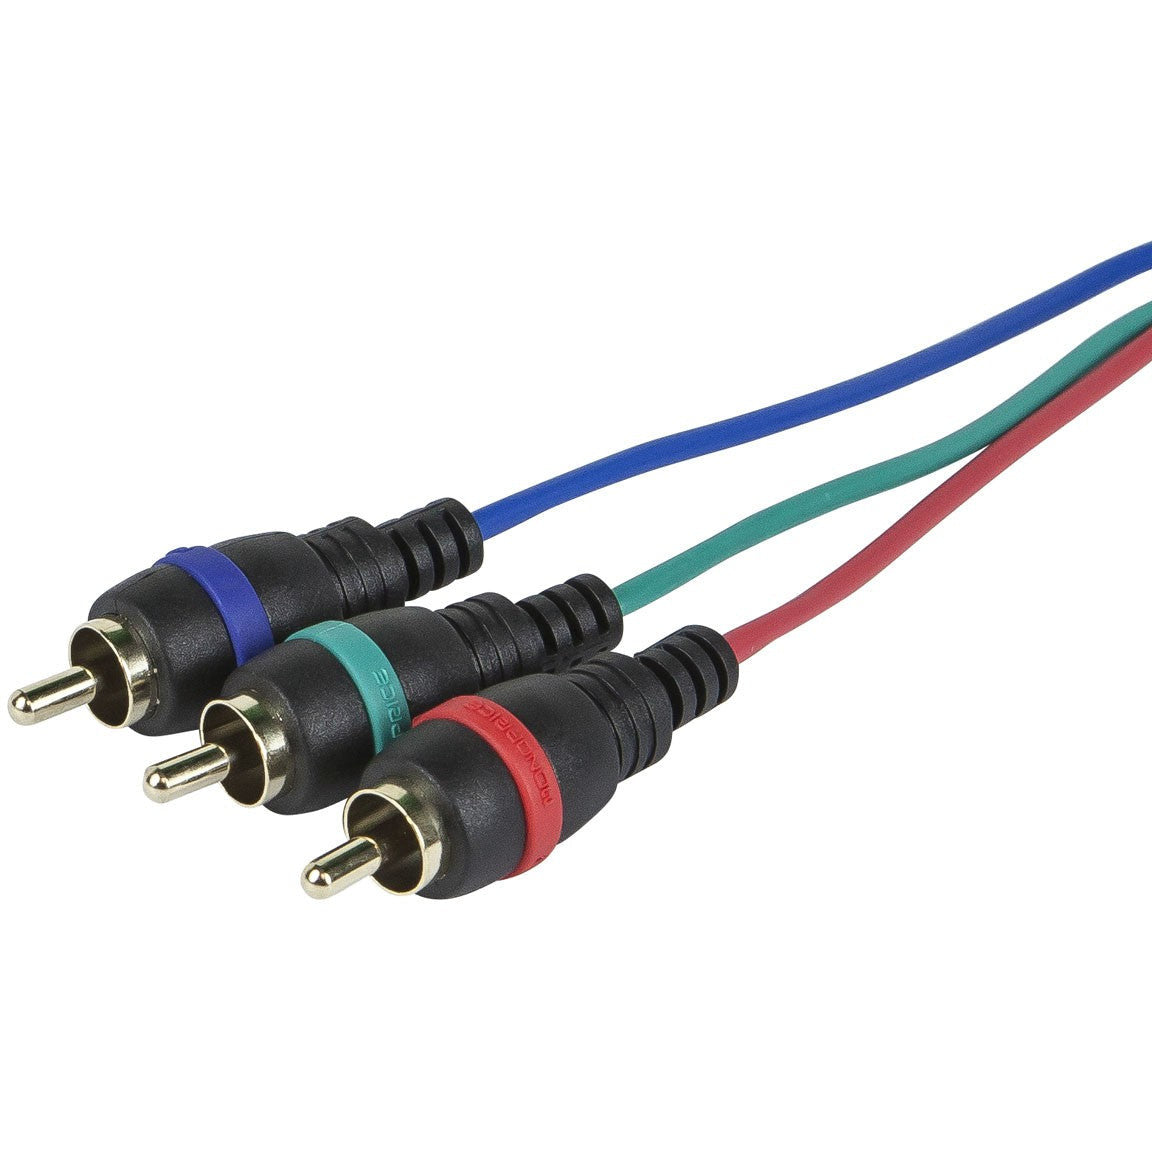 Your Cable Store 12 Foot RCA Audio/Video Cable 3 Male to 3 Male